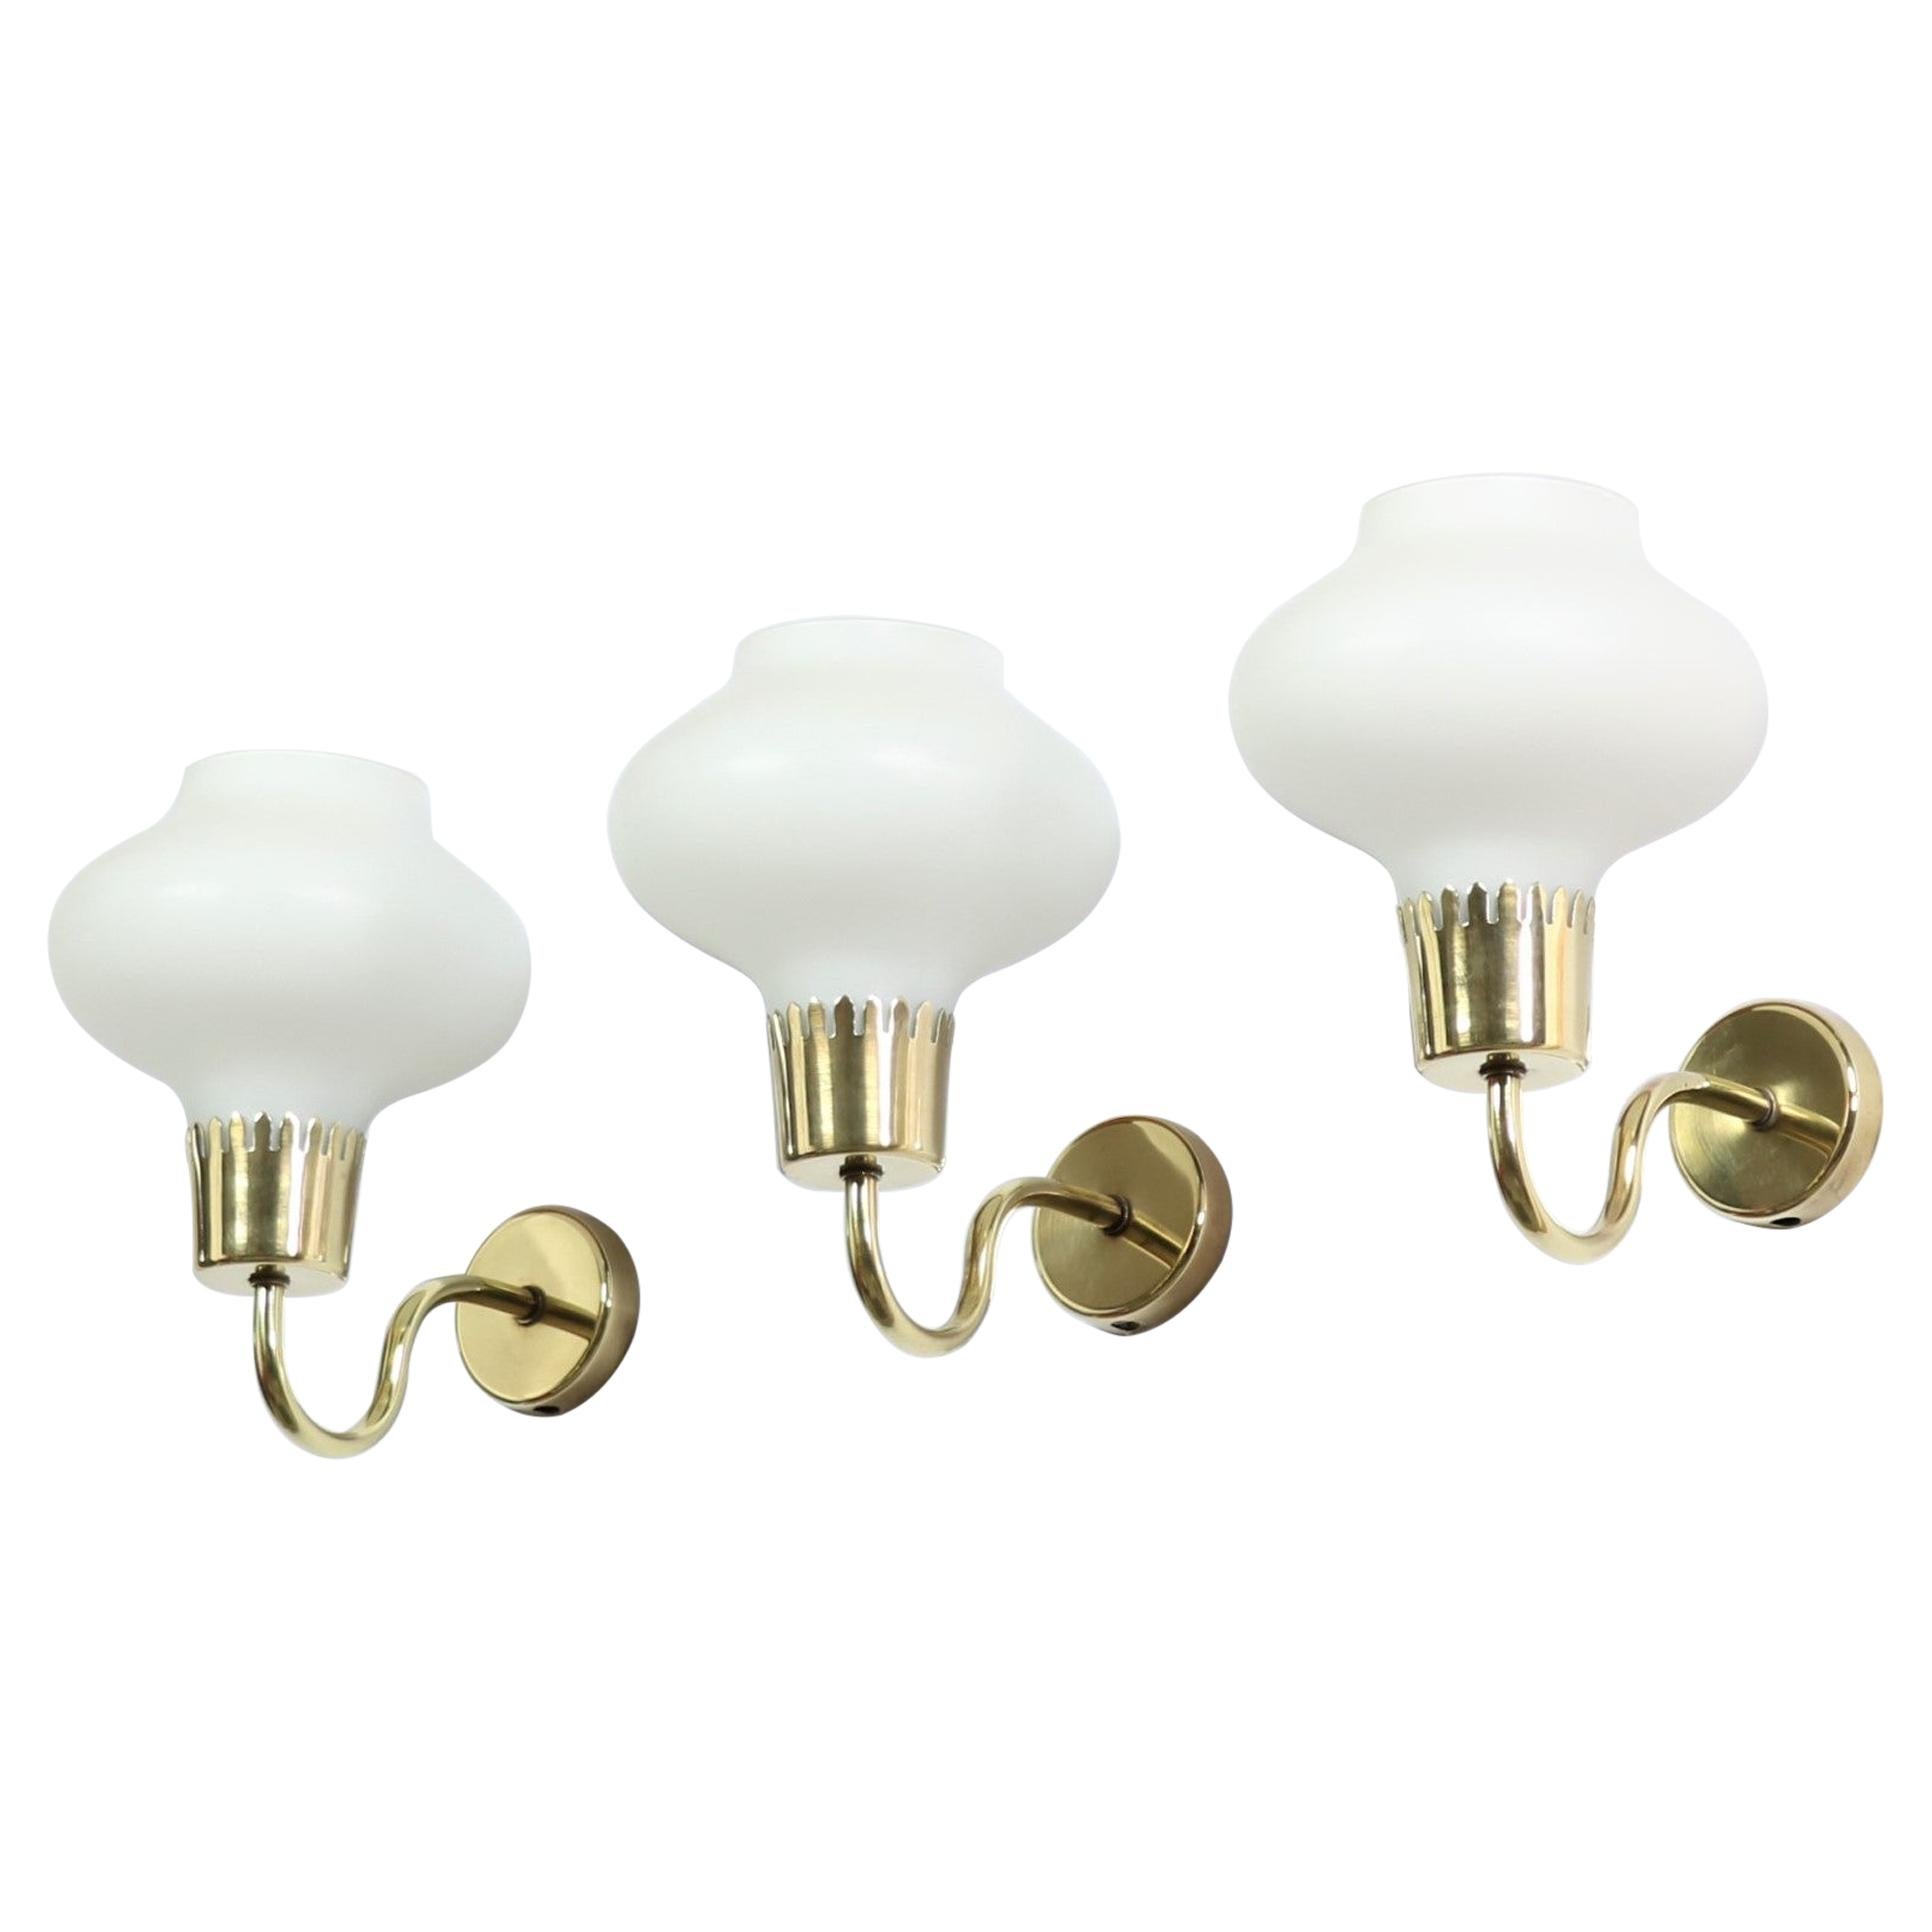 Set of Danish Modern Brass and Opal Glass Wall Sconces by Acton Bjorn, 1950s